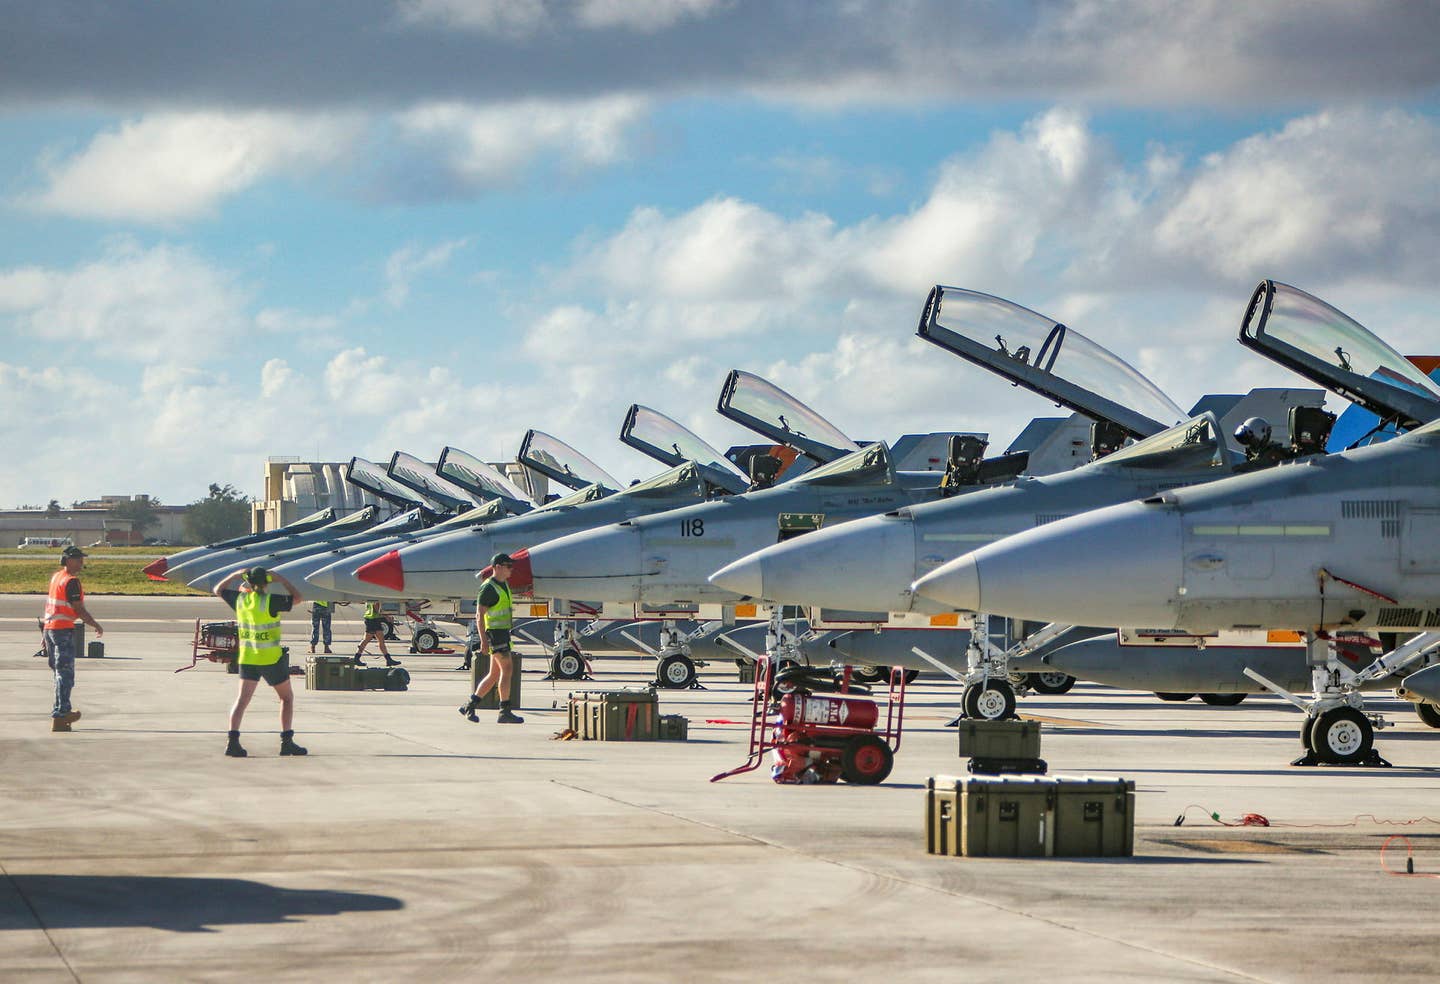 RAAF Hornets sit on the flightline during an exercise during their time in service. (RAAF)